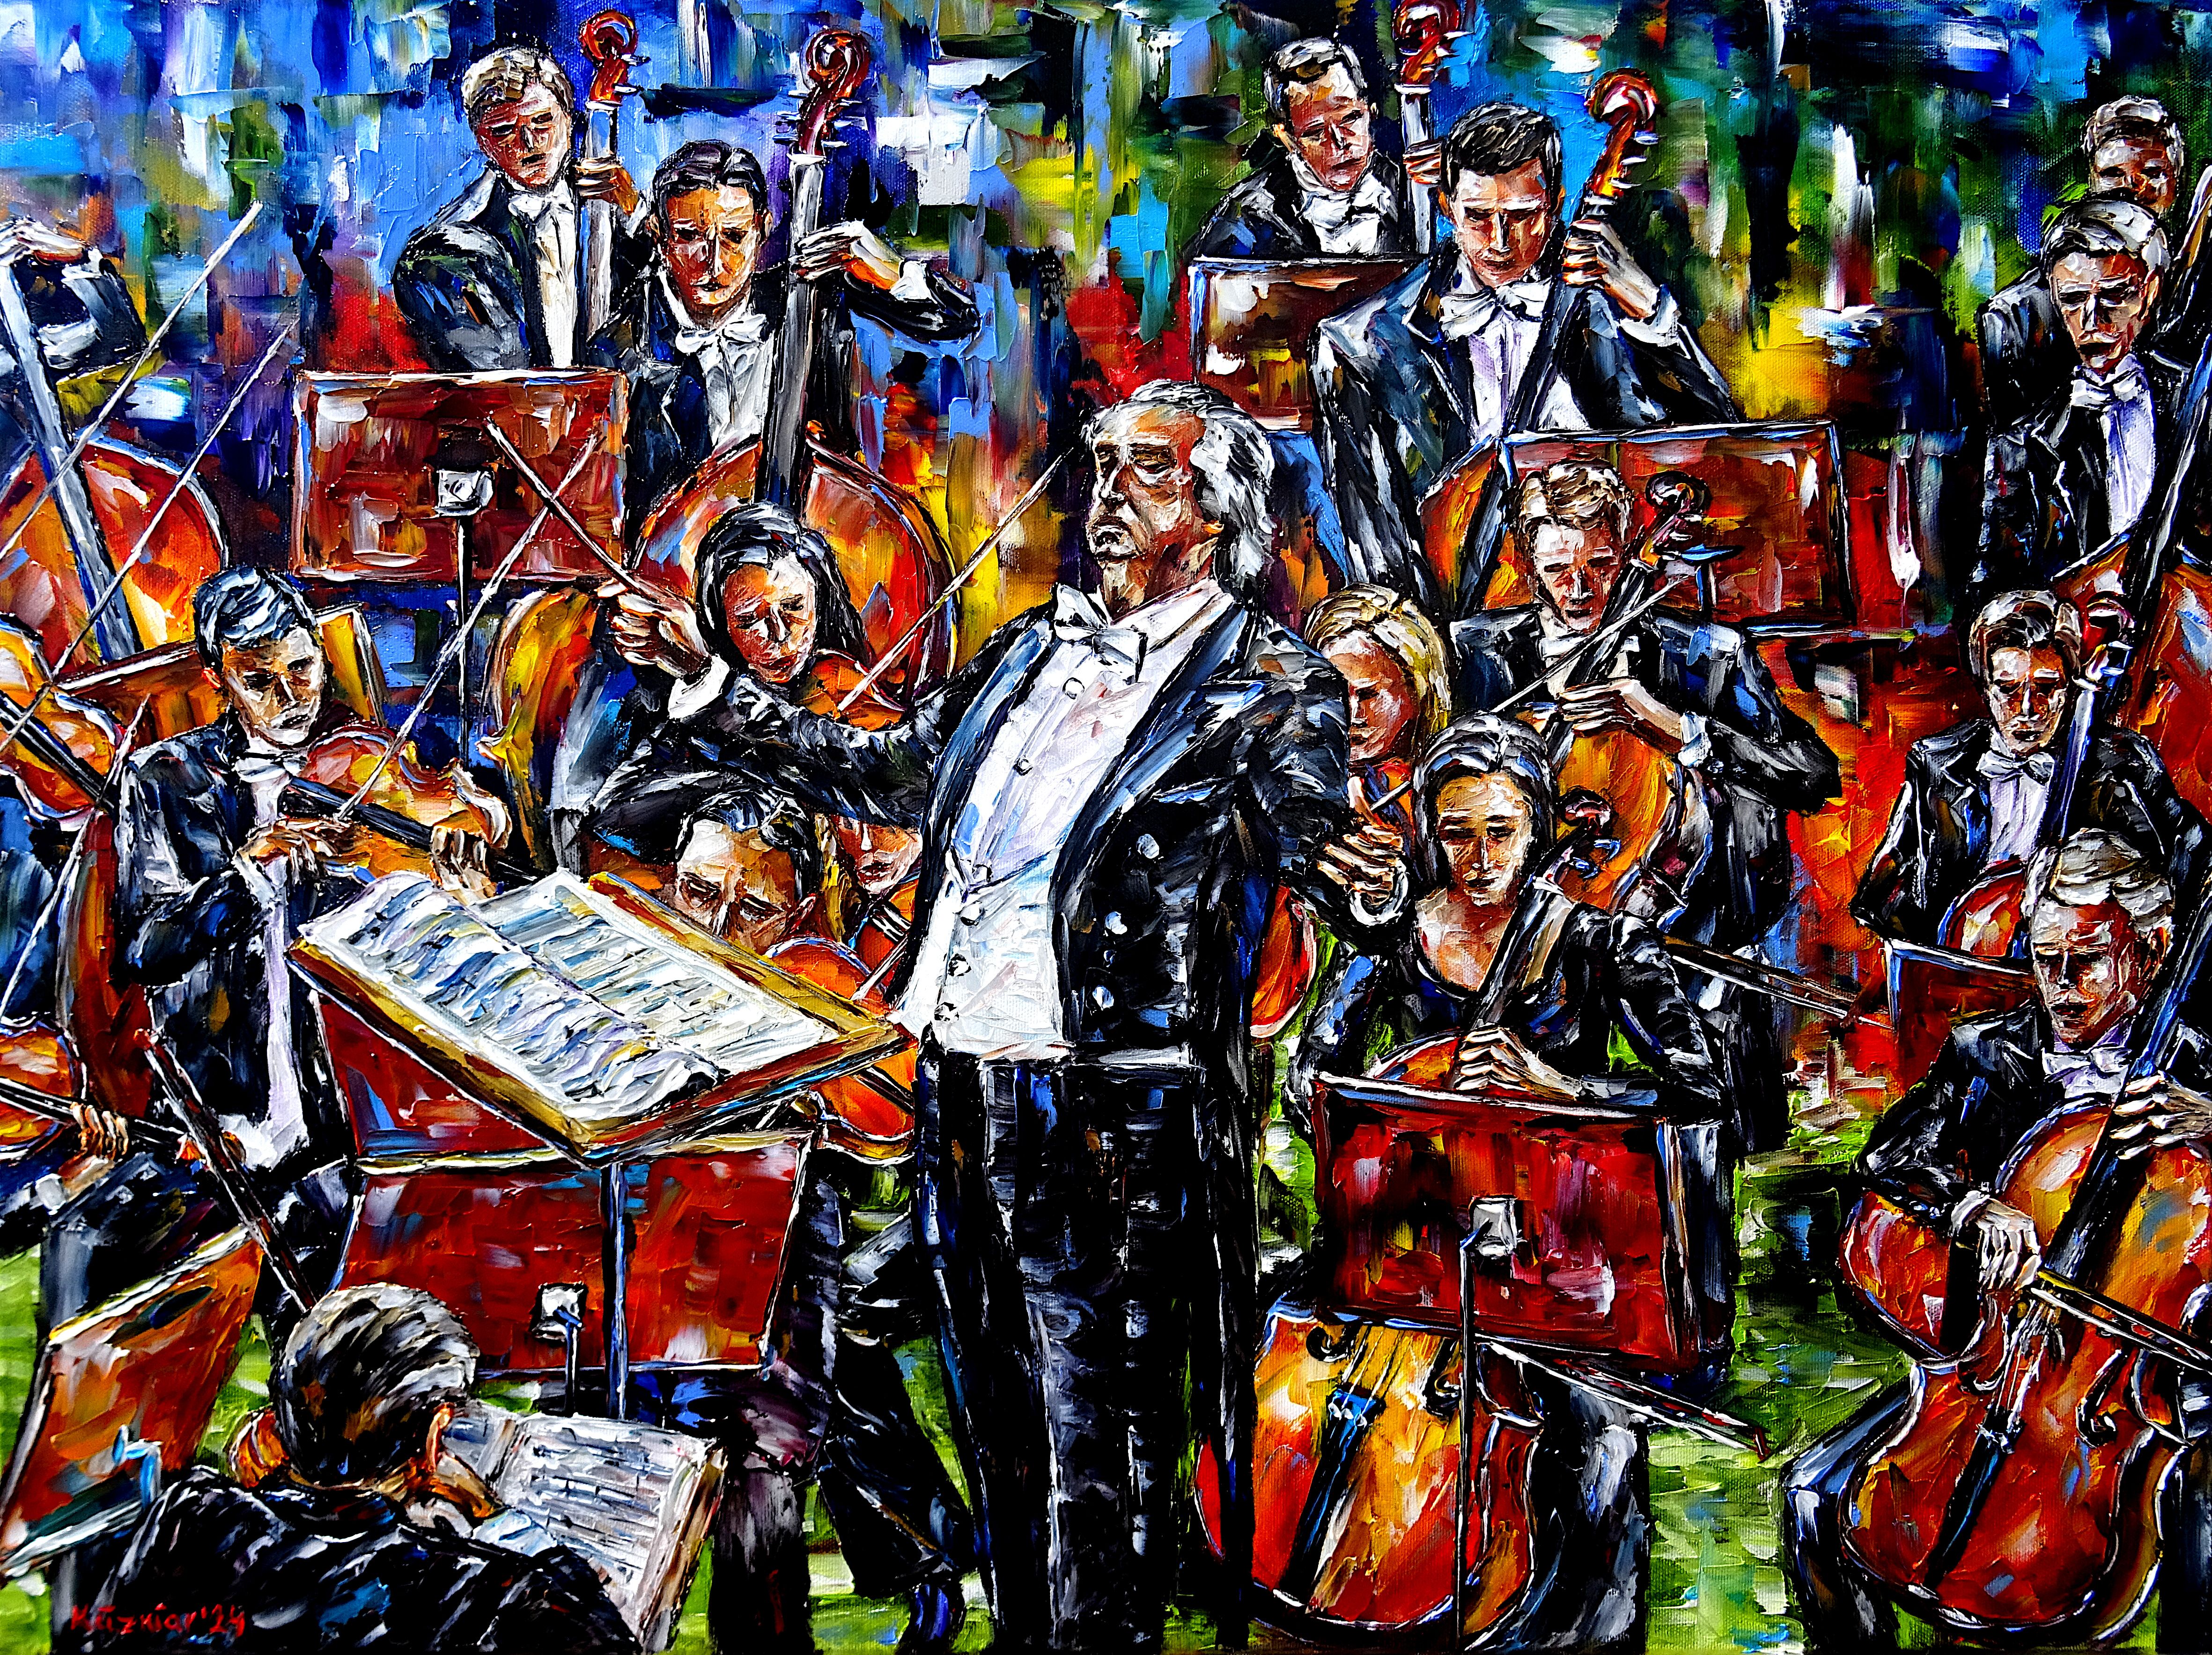 riccardo muti,conductor,orchestra,conducting,chicago symphony orchestra,violin player,violinist,playing violin,riccardo muti portrait,riccardo muti conducting,cello,cello player,playing cello,music,musician,classical music,classical,classical love,classical lovers,orchestra painting,riccardo muti painting,conductor painting,making music,playing music,immersed in music,feeling music,sensing music,closed eyes,musical instrument,palette knife oil painting,expressive art,expressive painting,expressionism,lively colors,colorful painting,impasto painting,figurative